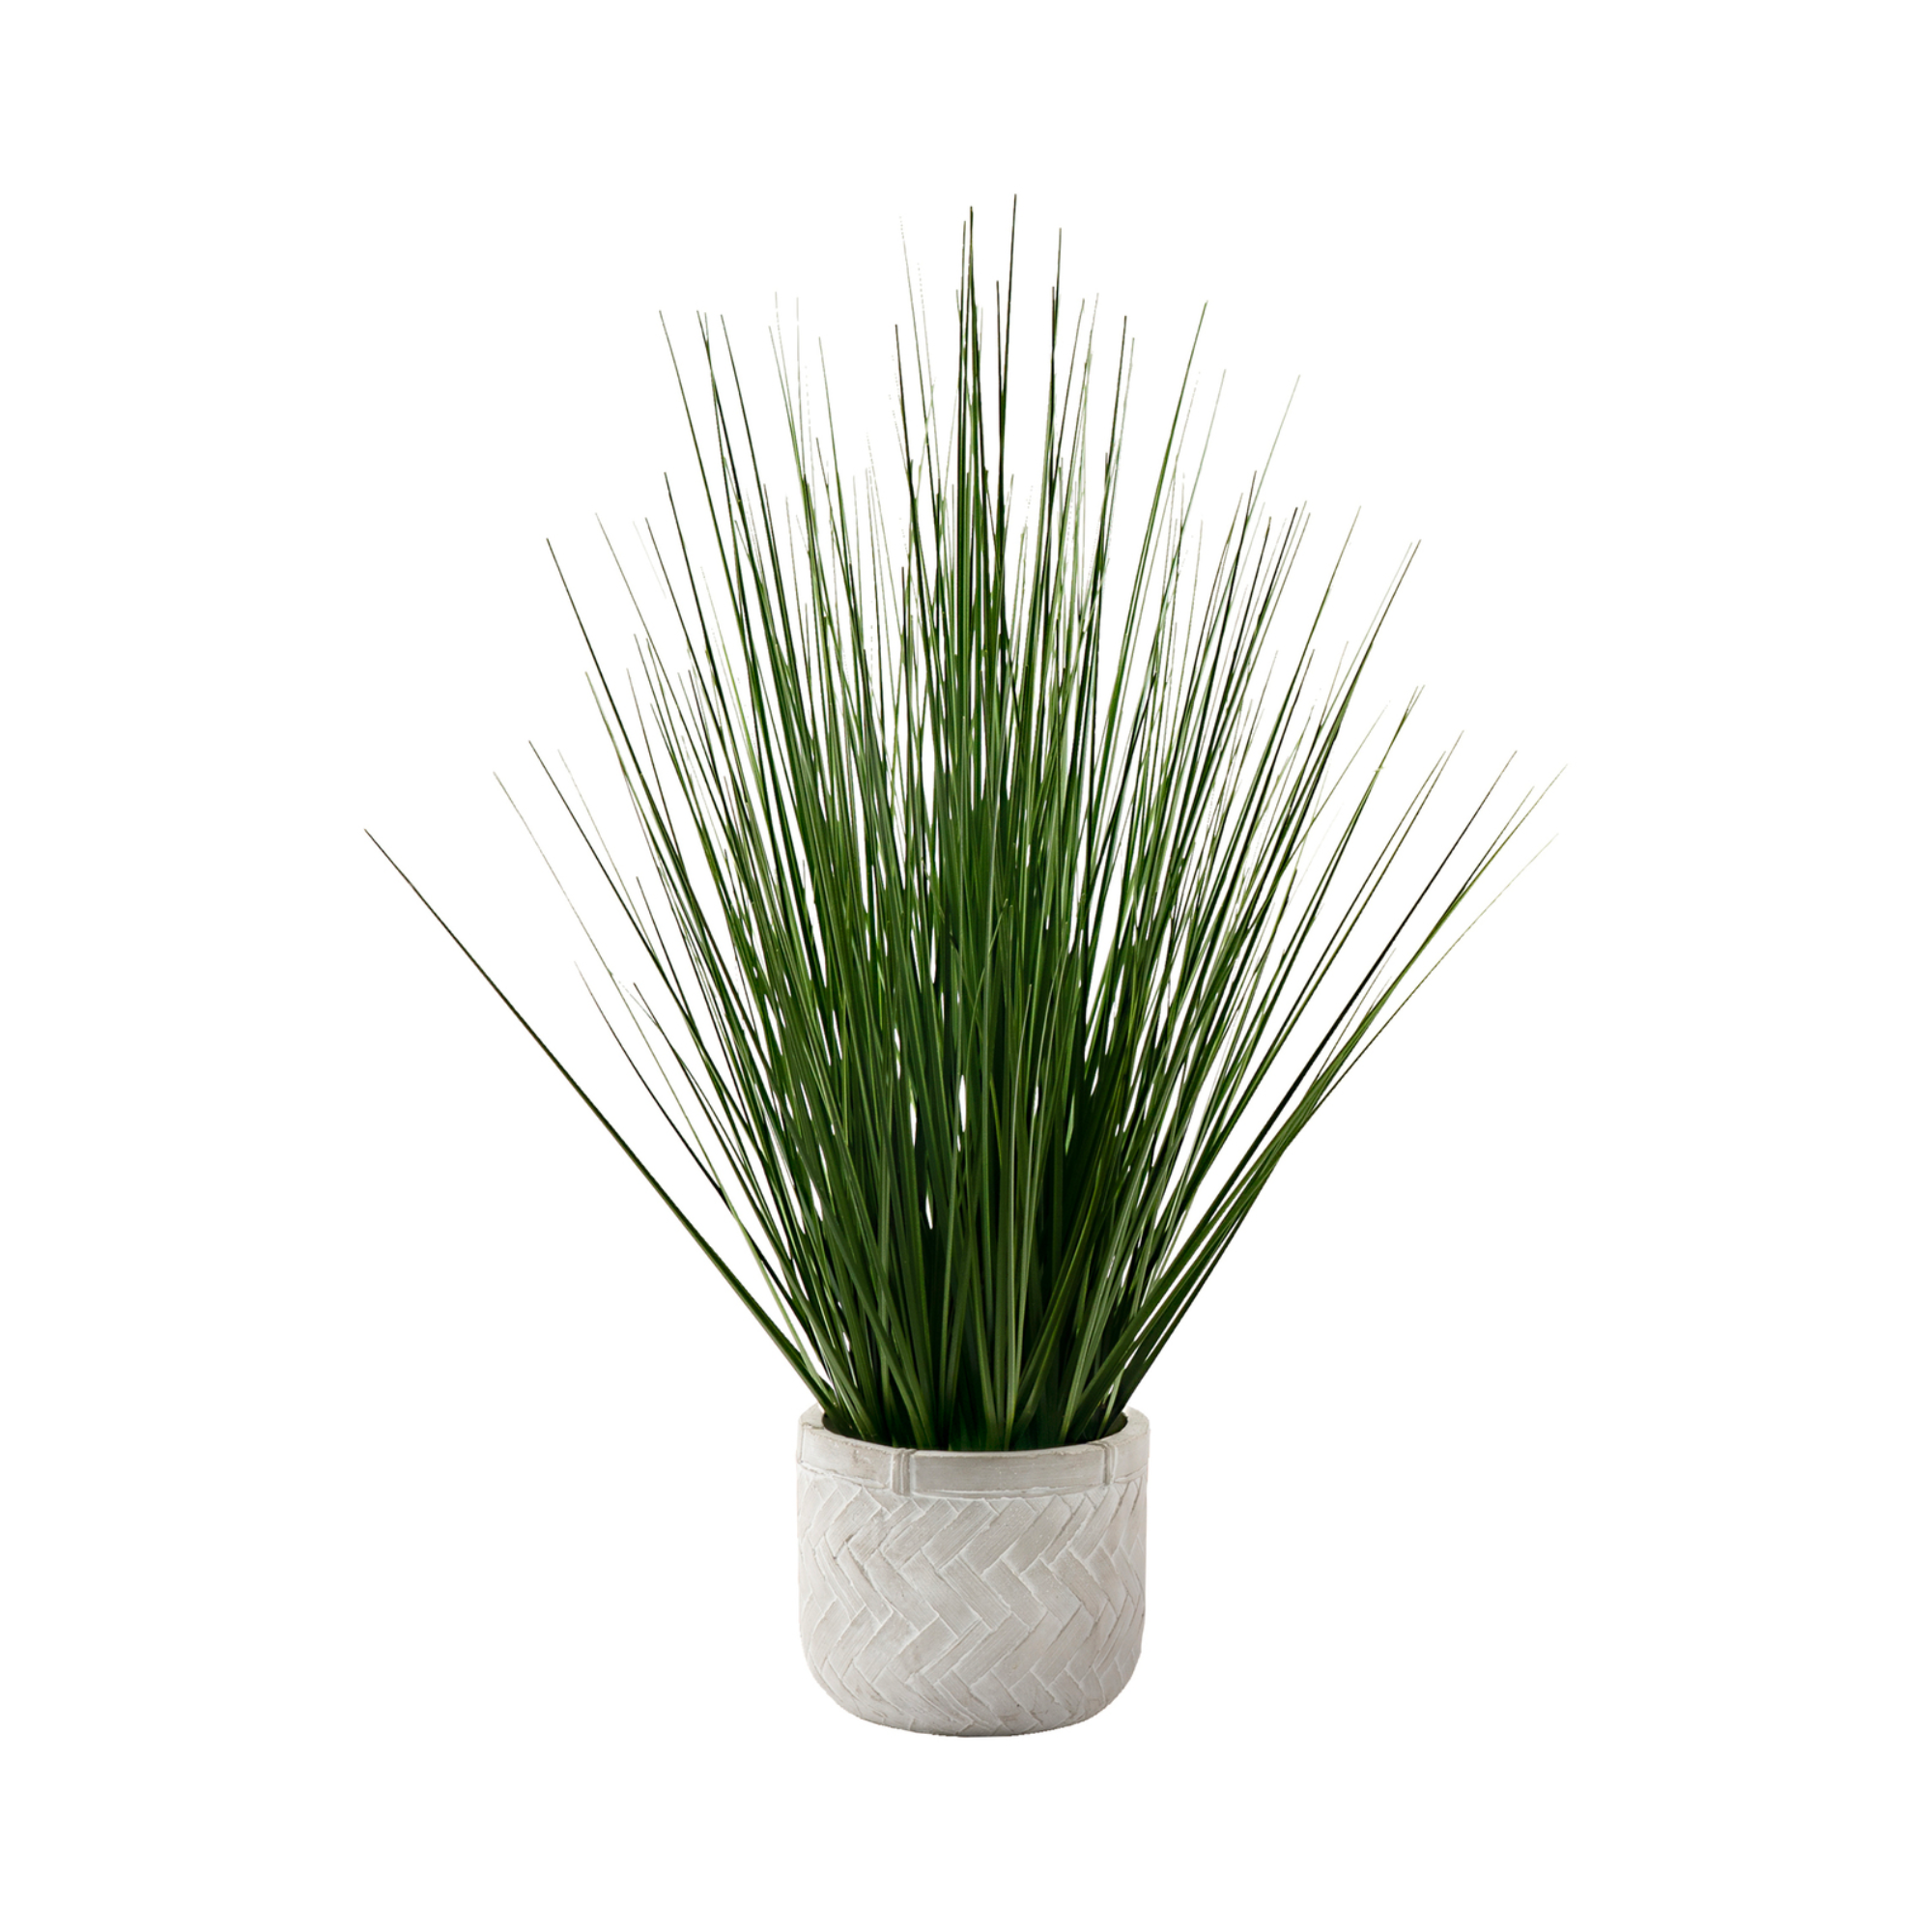 ARTIFICIAL PLANT - 21"H / INDOOR GRASS IN CEMENT 4" POT